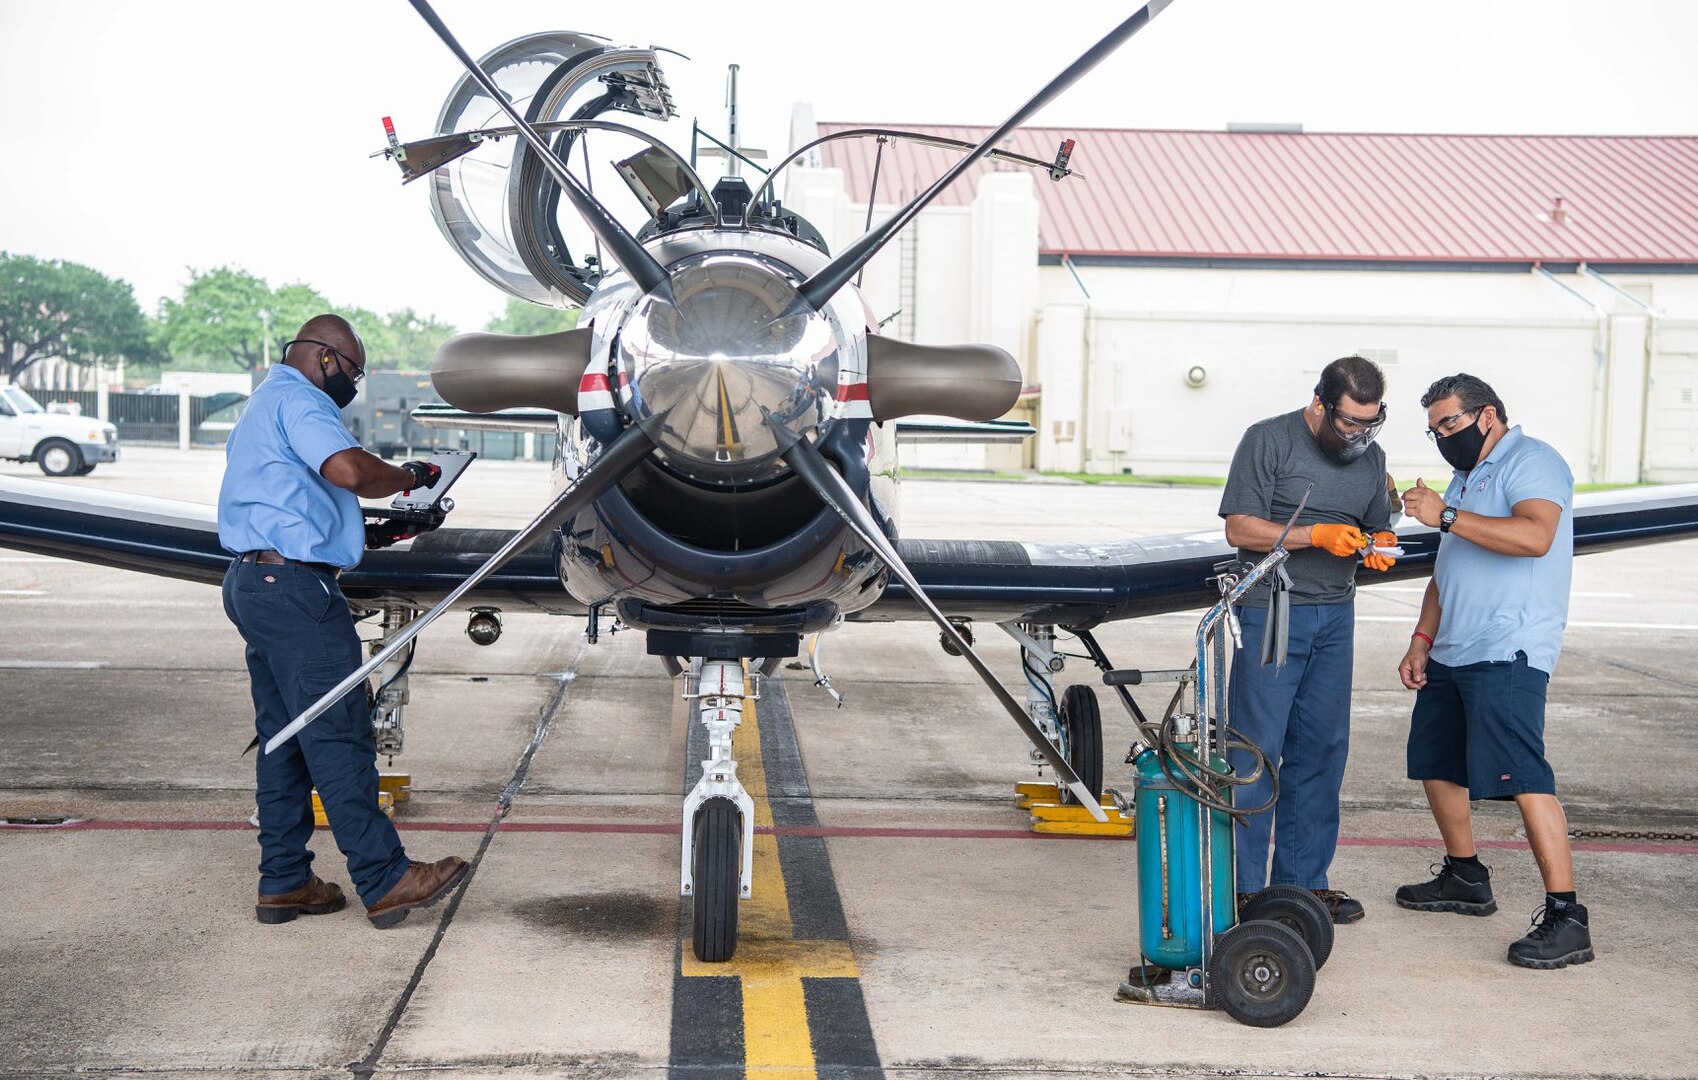 Larry Padilla, 12th Aircraft Maintenance Squadron, inspects the oil level reading of a T-6 Texan aircraft with Greg Garcia, 12th AMXS, at Joint Base San Antonio-Randolph April 7.